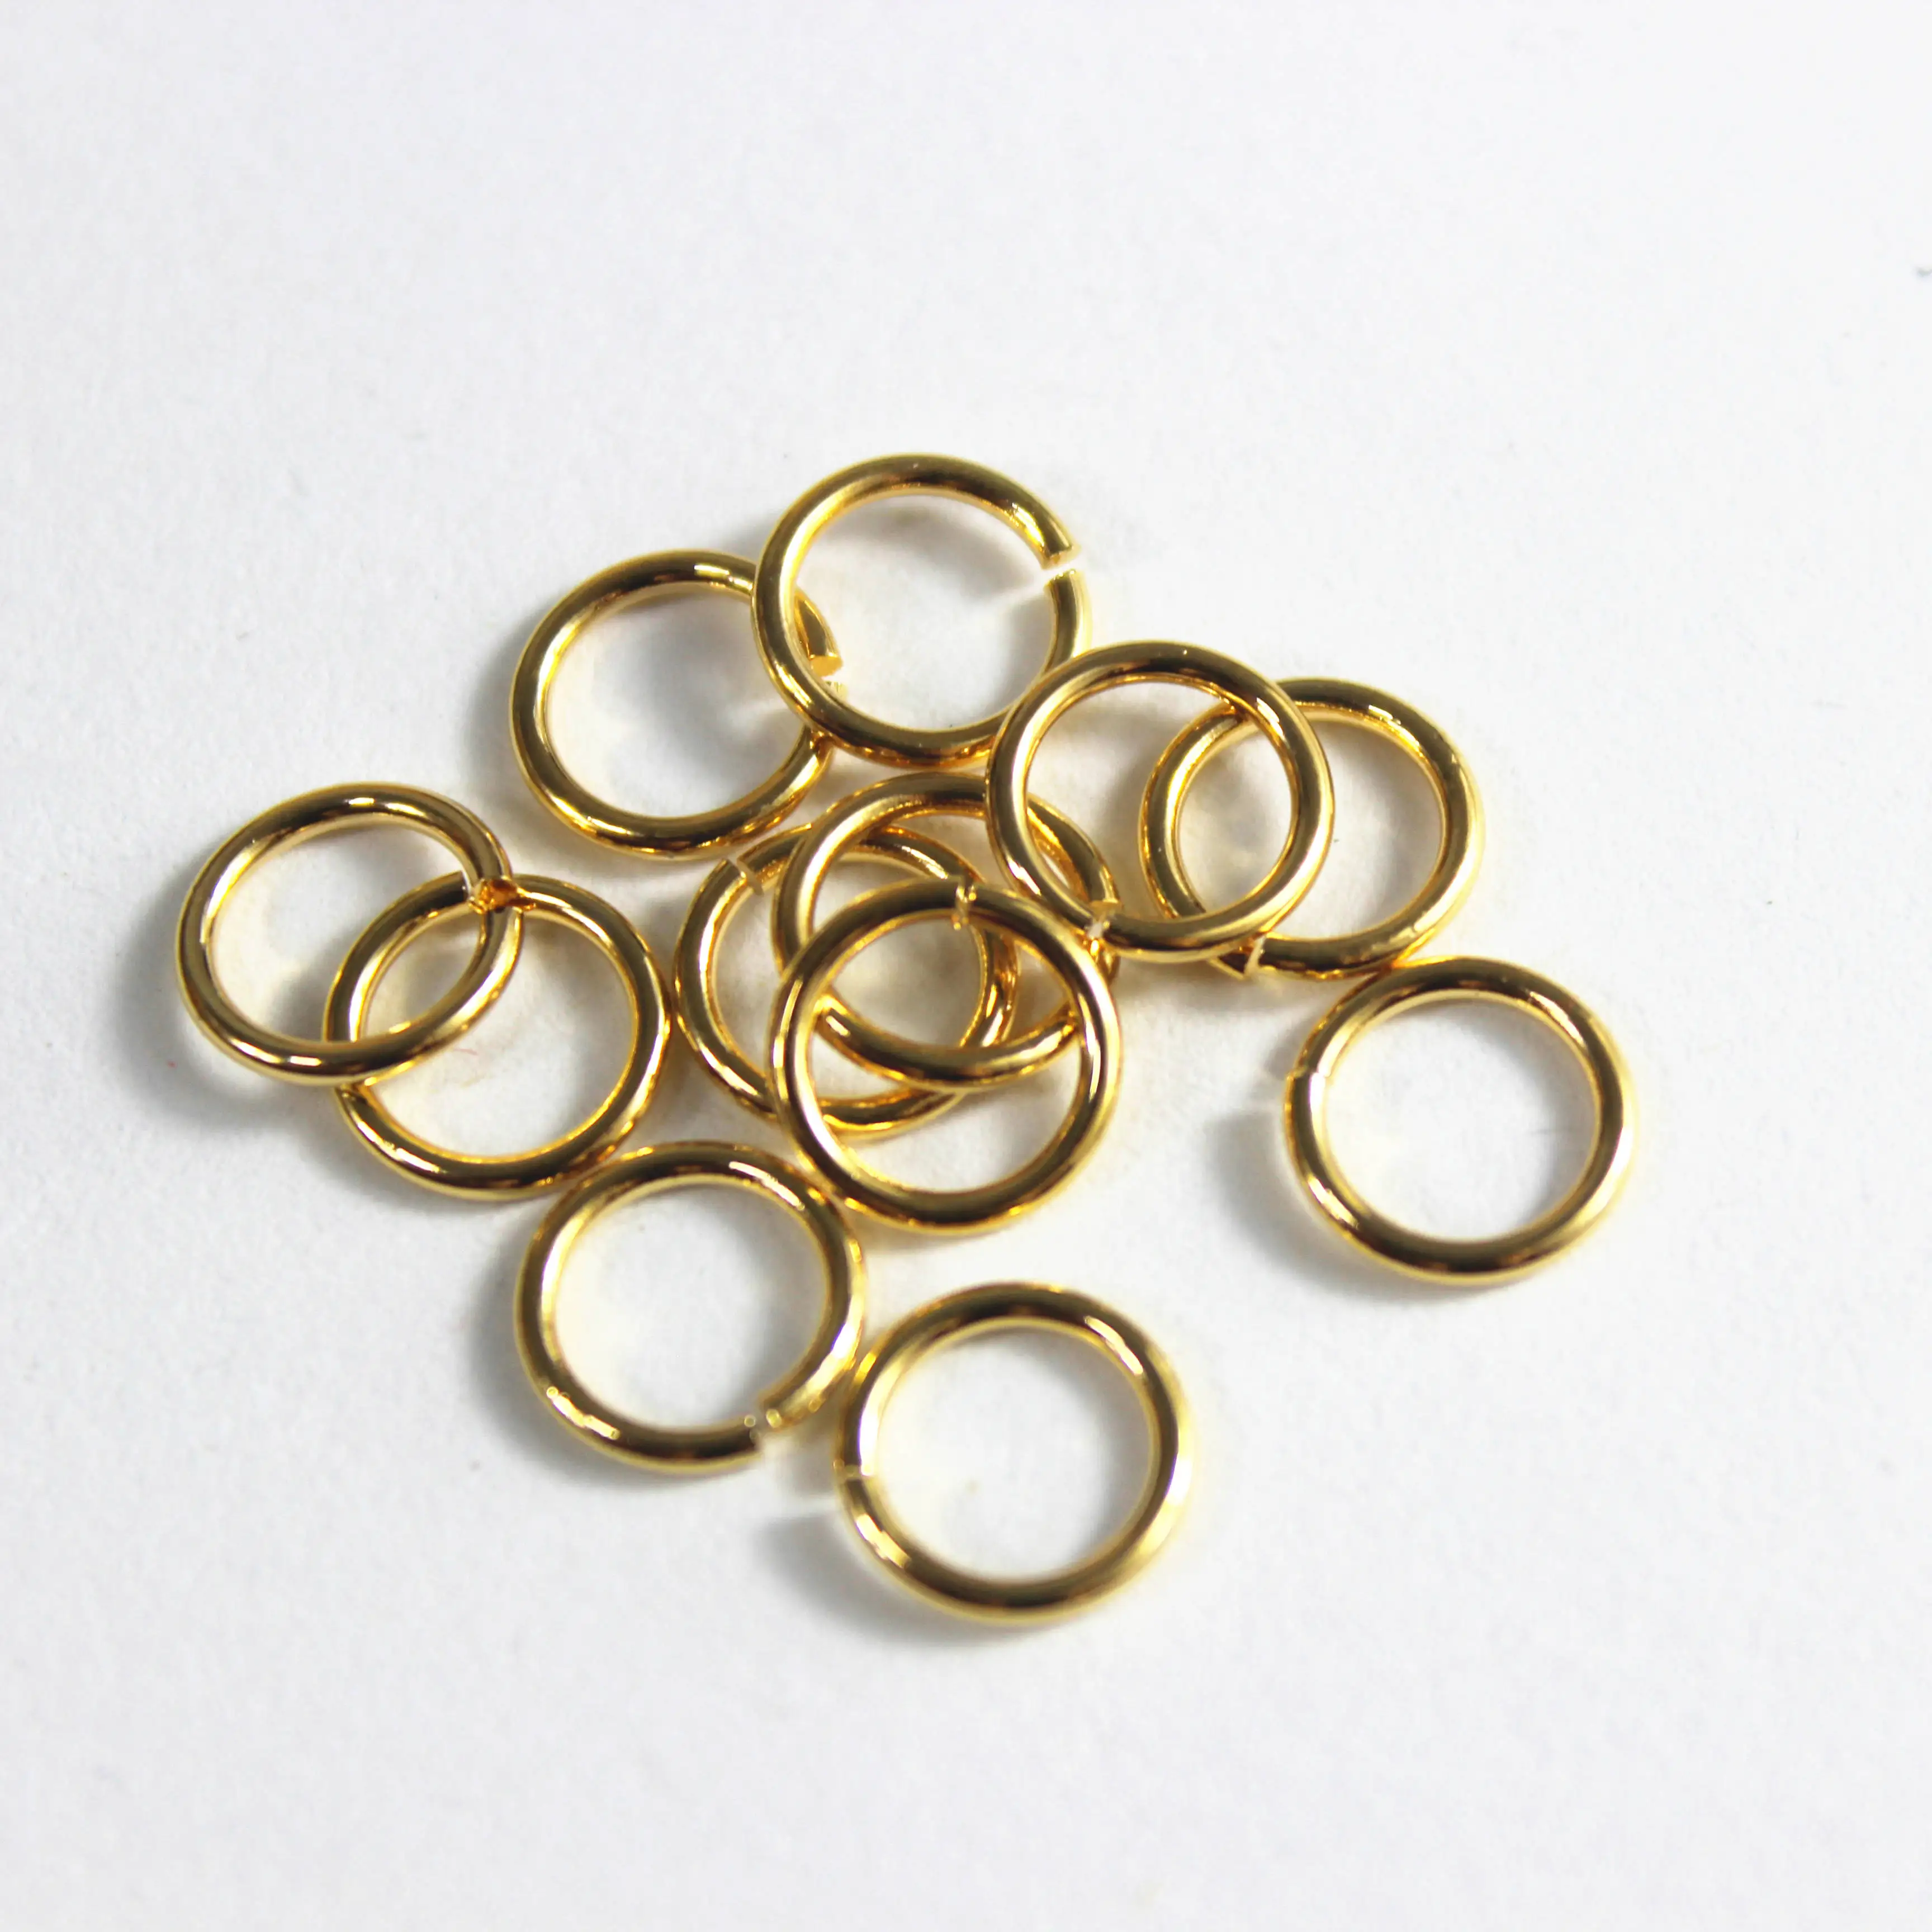 

Wholesale Chinese 24K Gold Filled Jump Ring for DIY jewelry findings